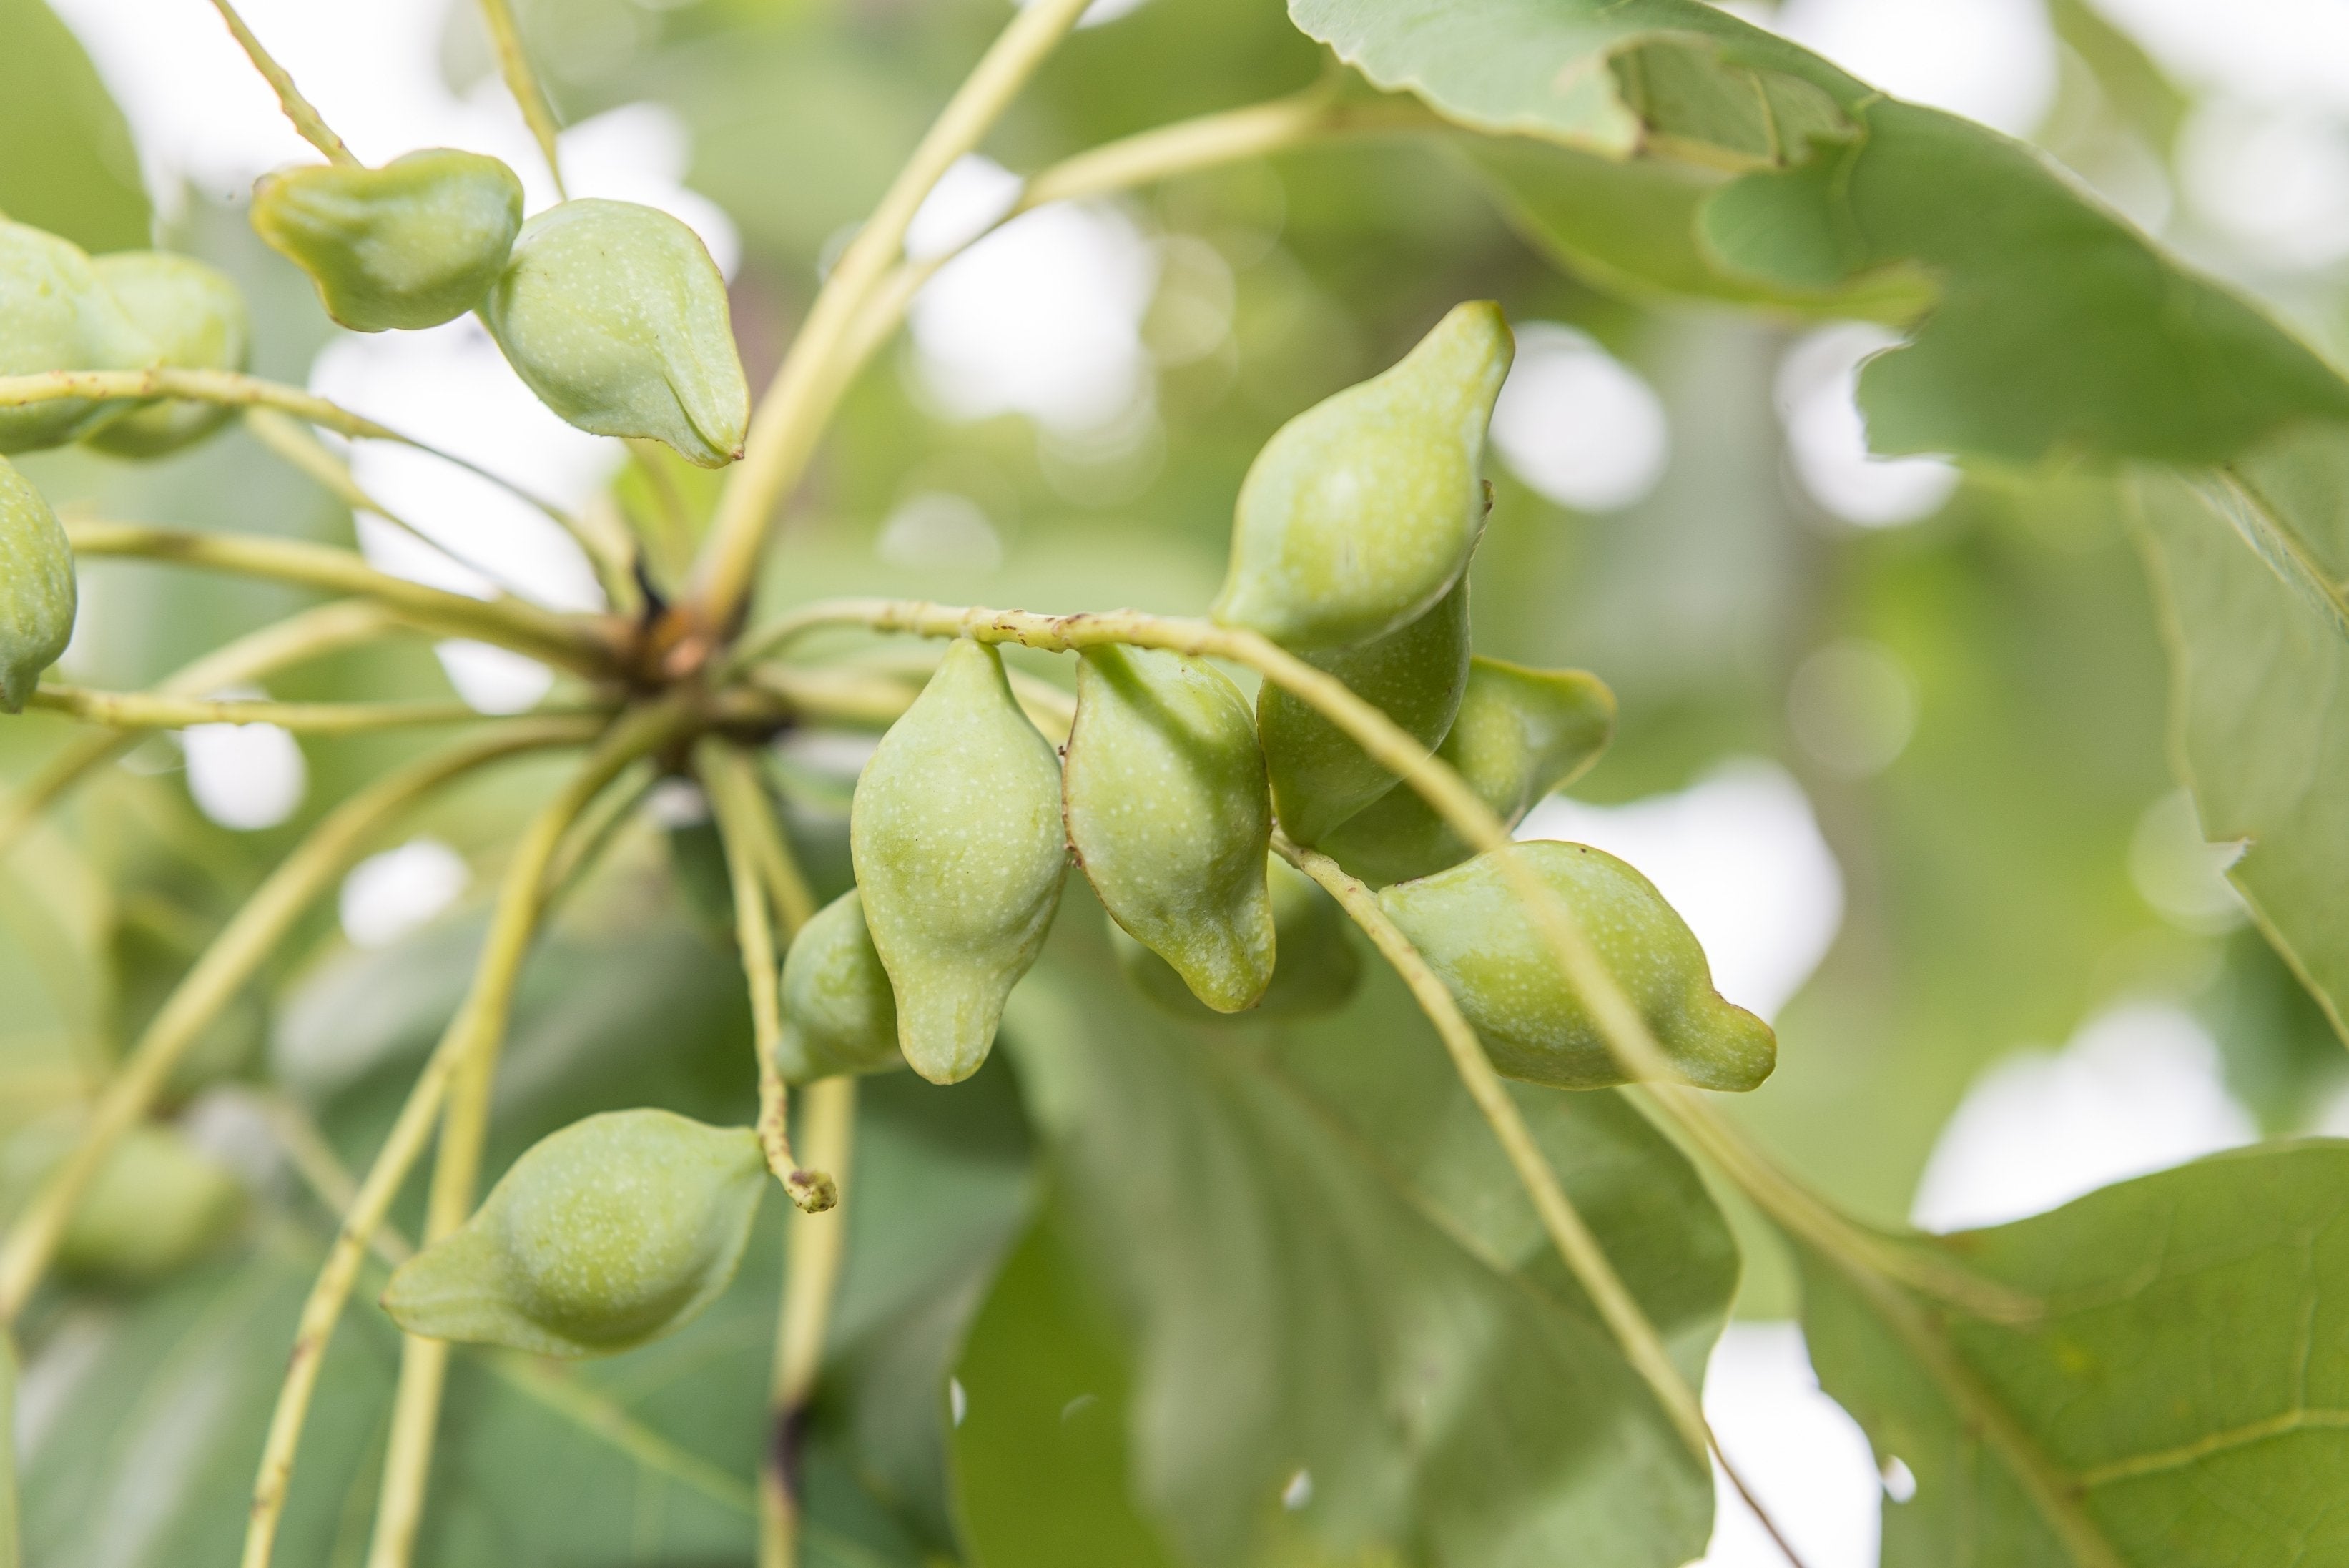 Are you missing out on the incredible benefits of Kakadu Plum?